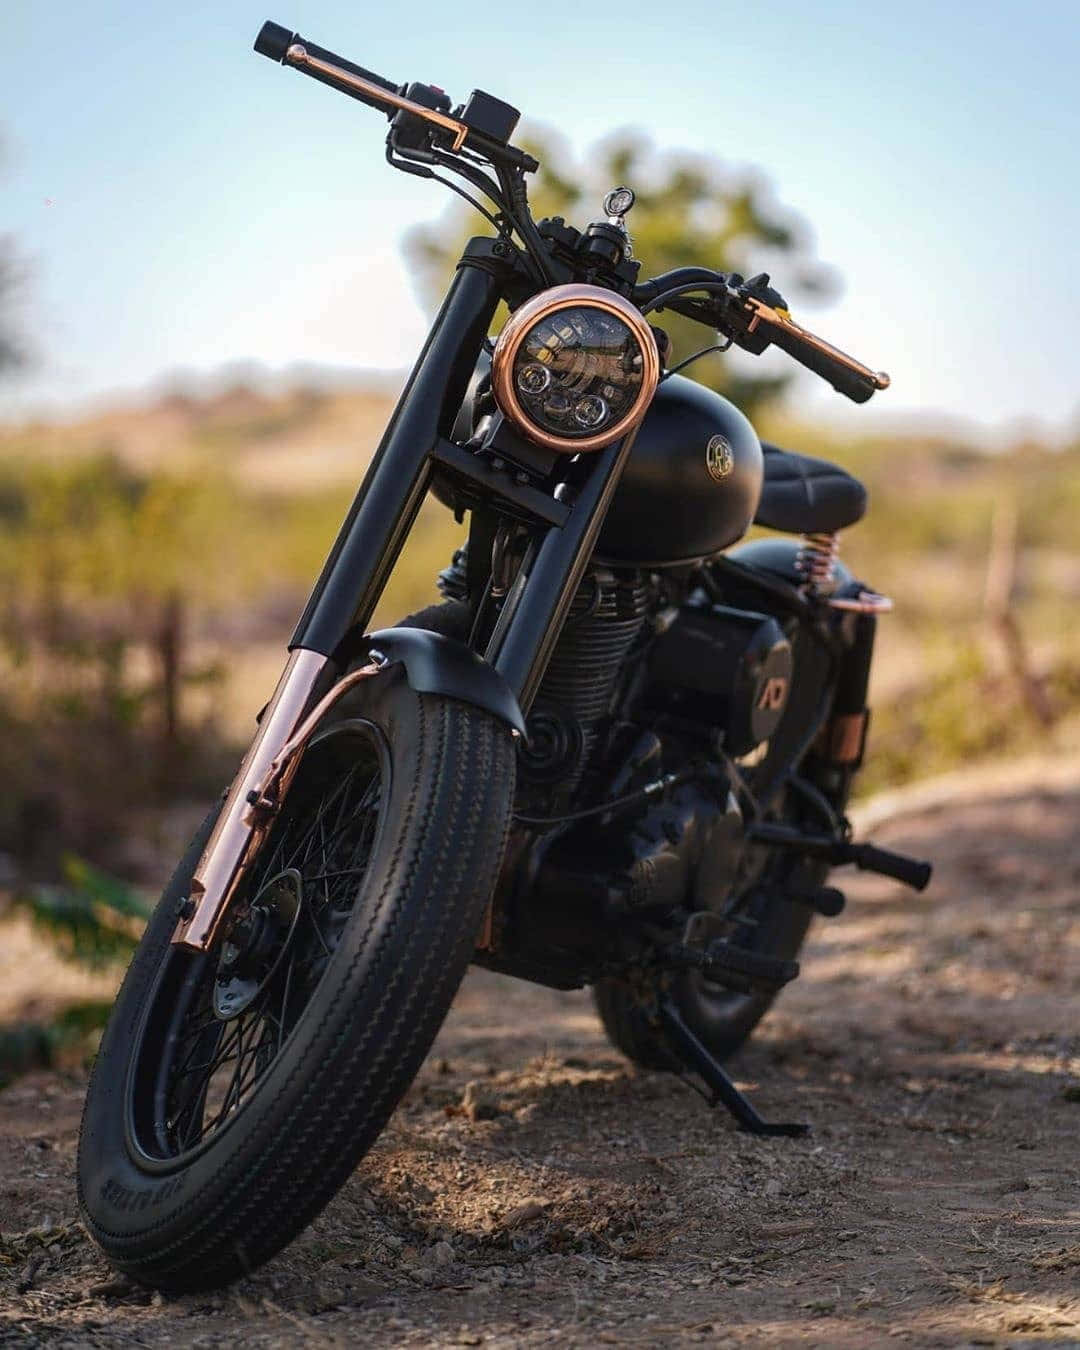 “Hit the open road with the Royal Enfield Bullet”